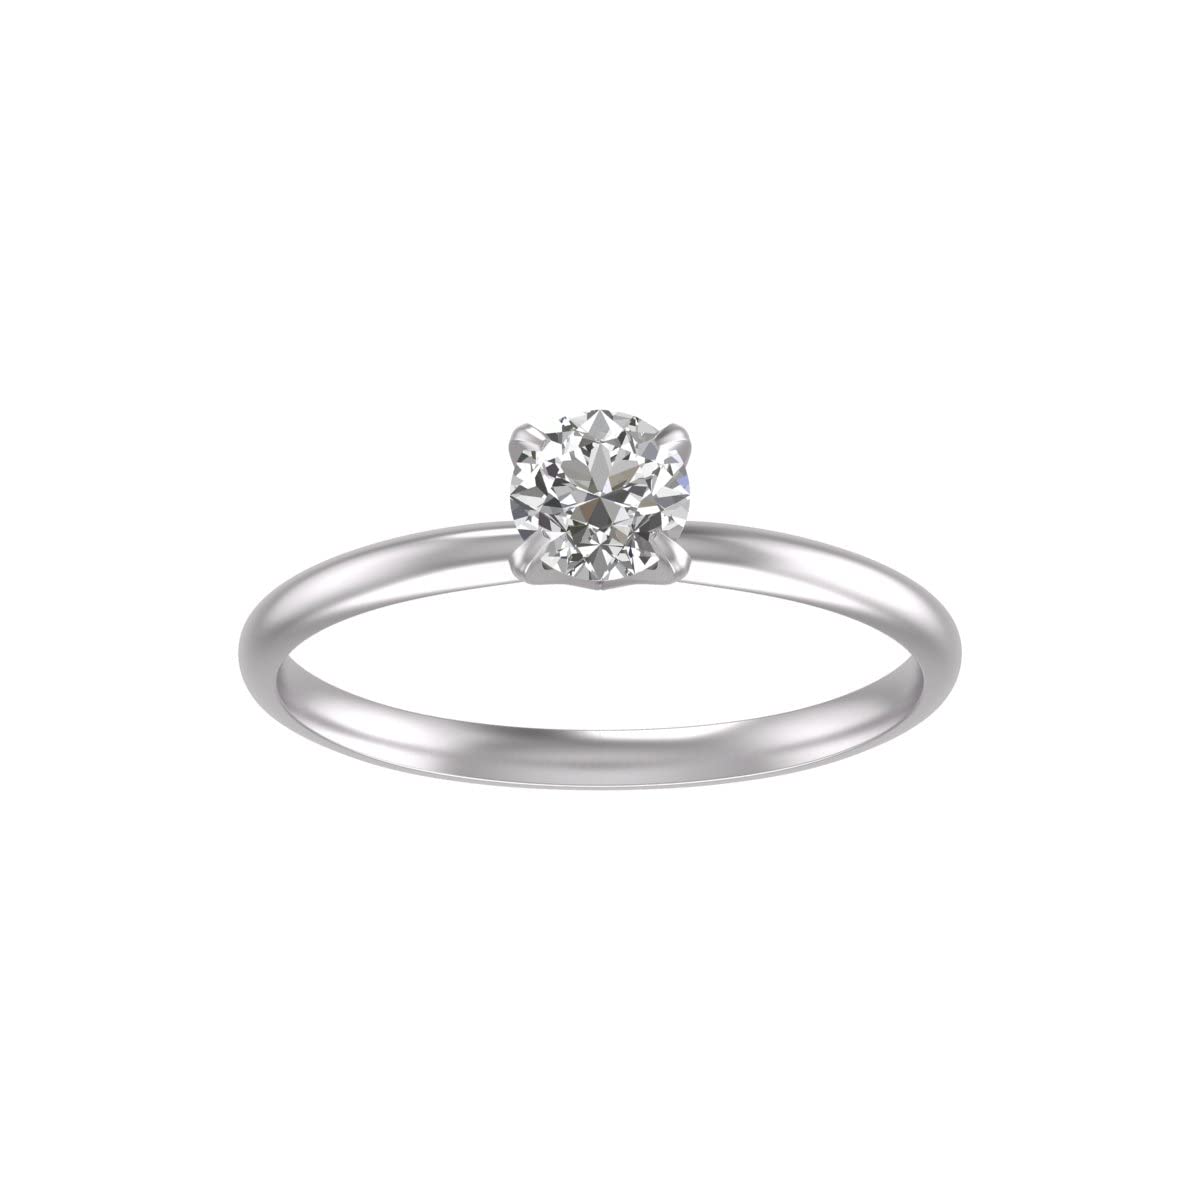 1/4 Carat Natural Diamond Solitaire Ring 14K White Gold 4 Prong (J-K Color I2-I3 Clarity)